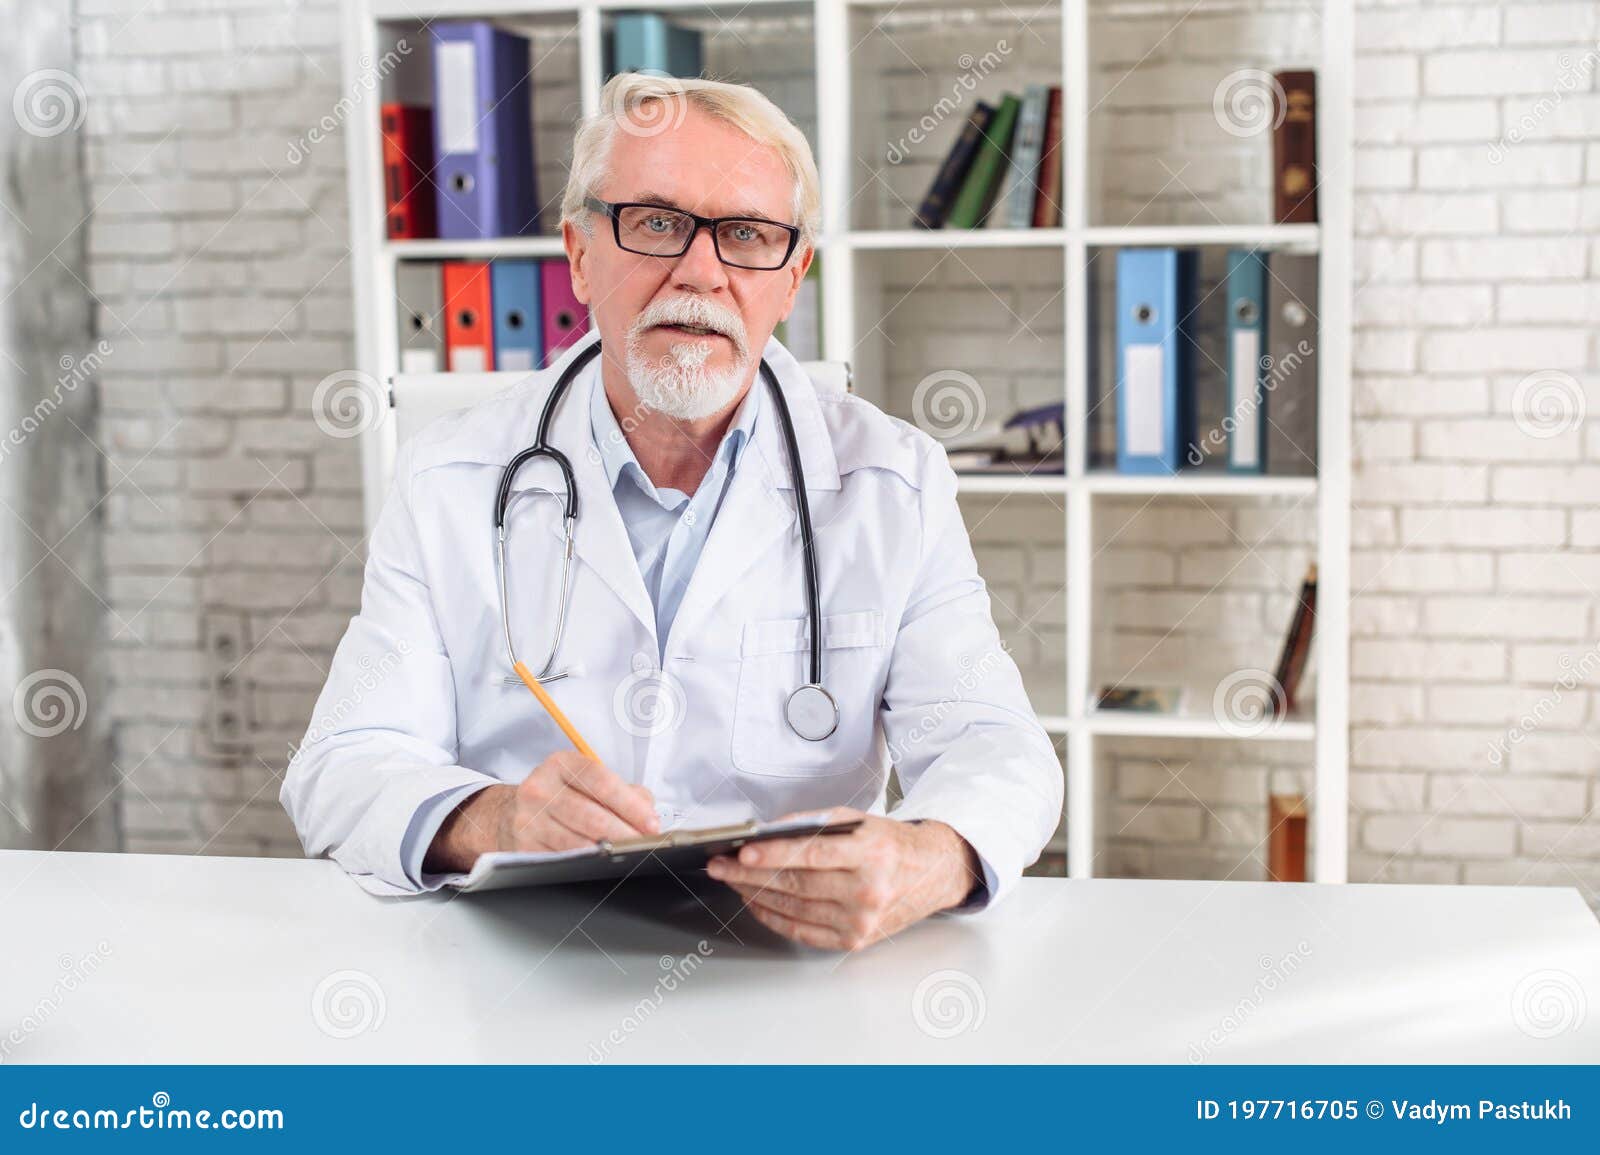 Headshot of Senior Male Doctor, Video Call Stock Image - Image of male ...